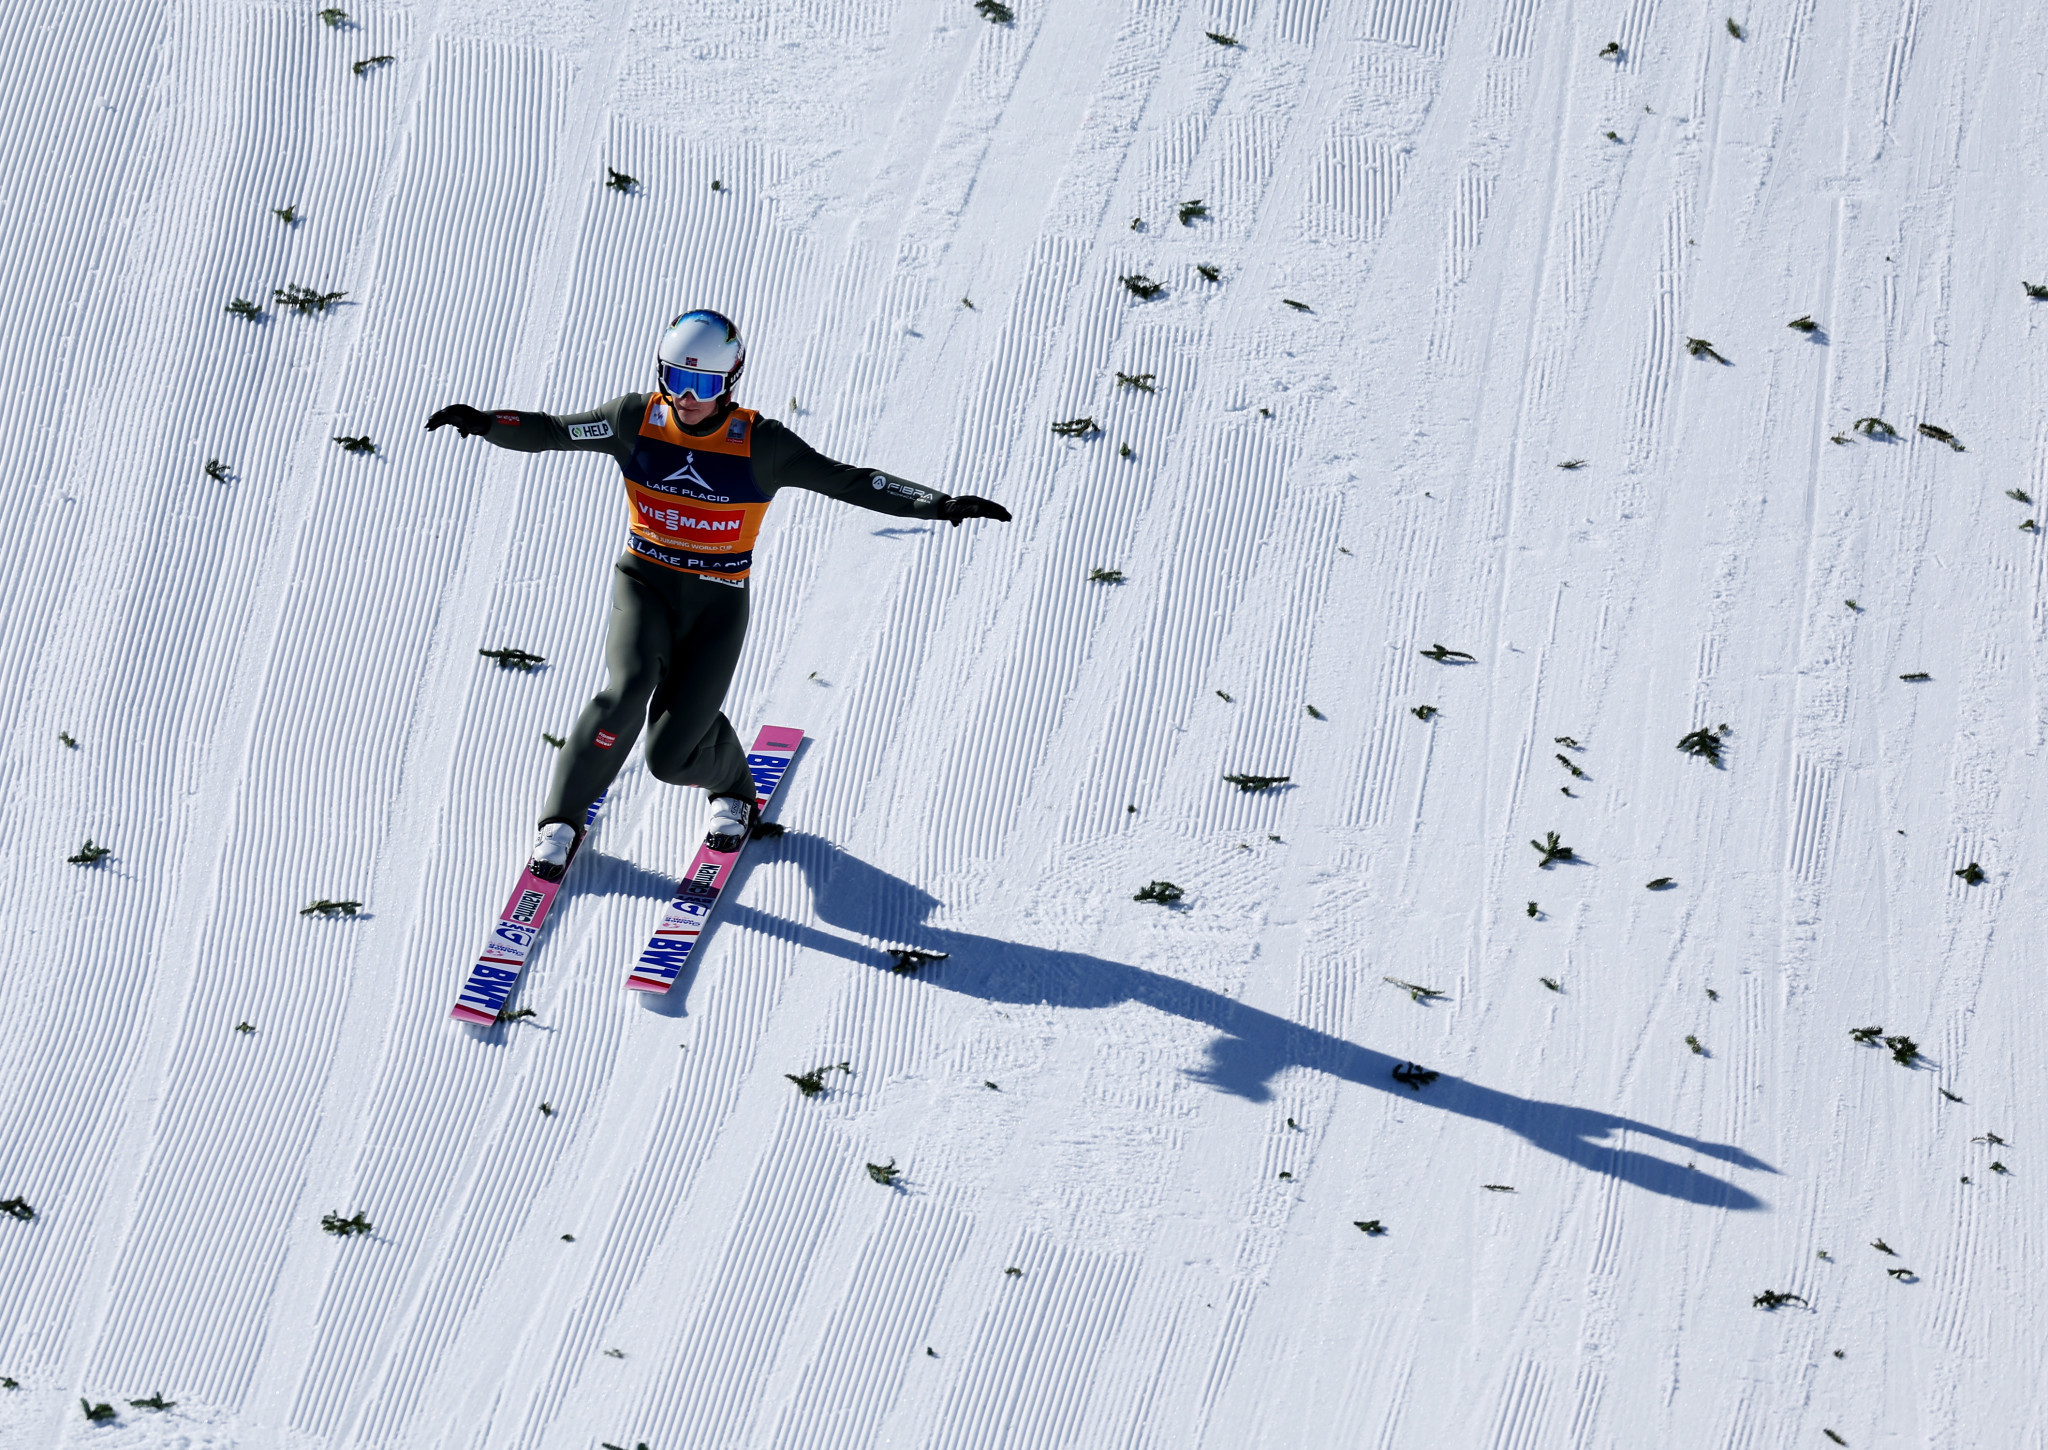 Norway's Halvor Egner Granerud has won five of the last six events on the men's Ski Jumping World Cup circuit ©Getty Images